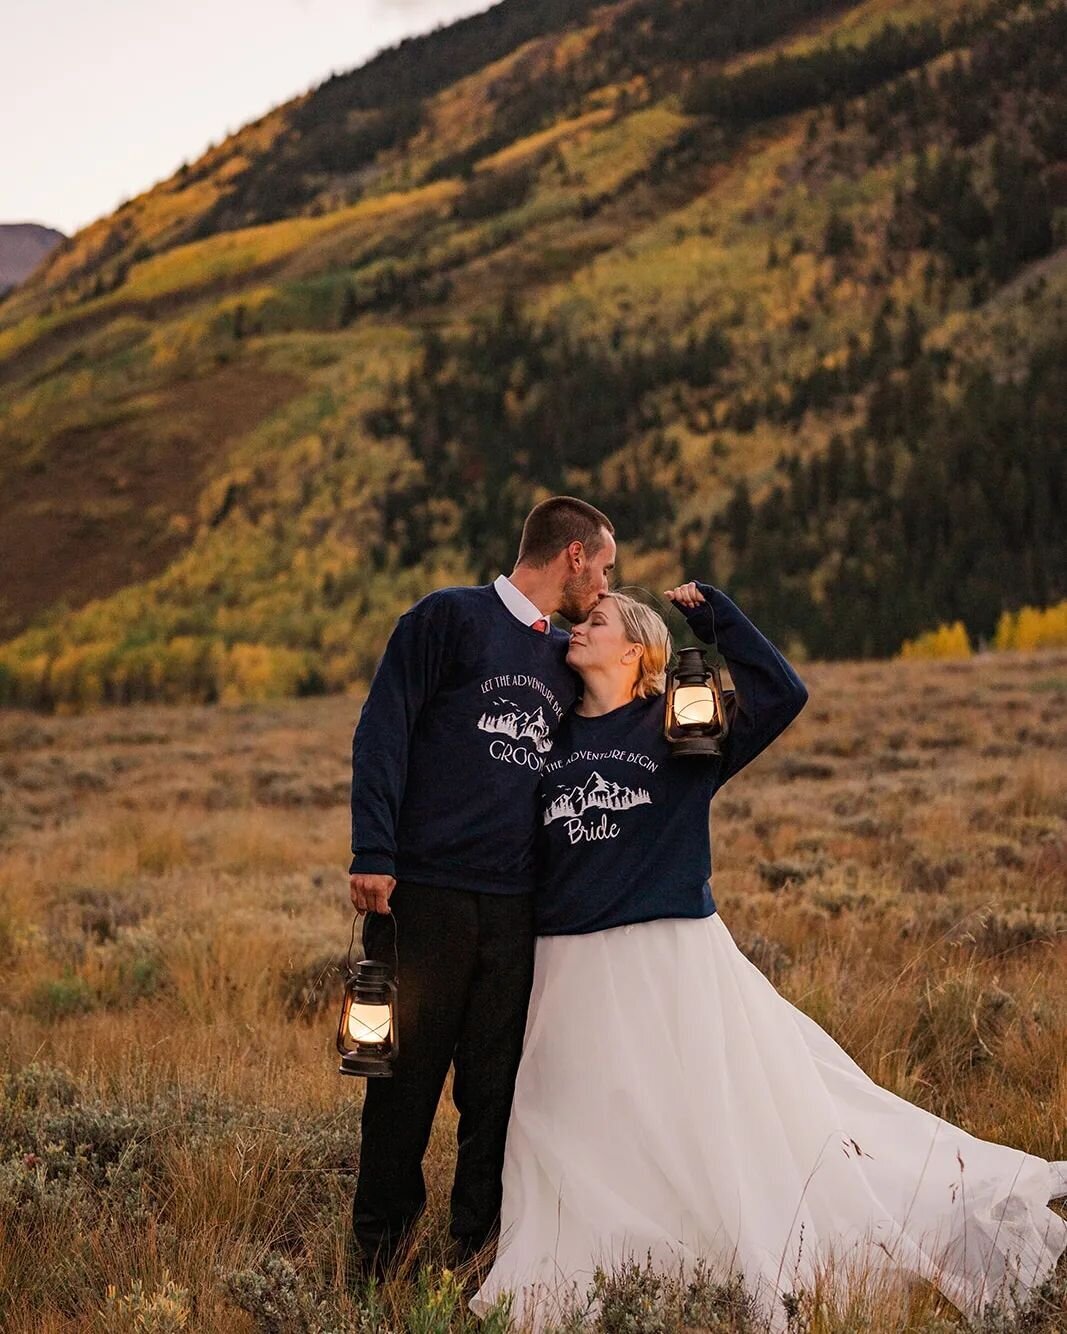 Celebrate your love with an intimate winter wedding in Colorado, surrounded by the snow-covered mountains, and let Sam Immer Photography capture the warmth and joy of the occasion.